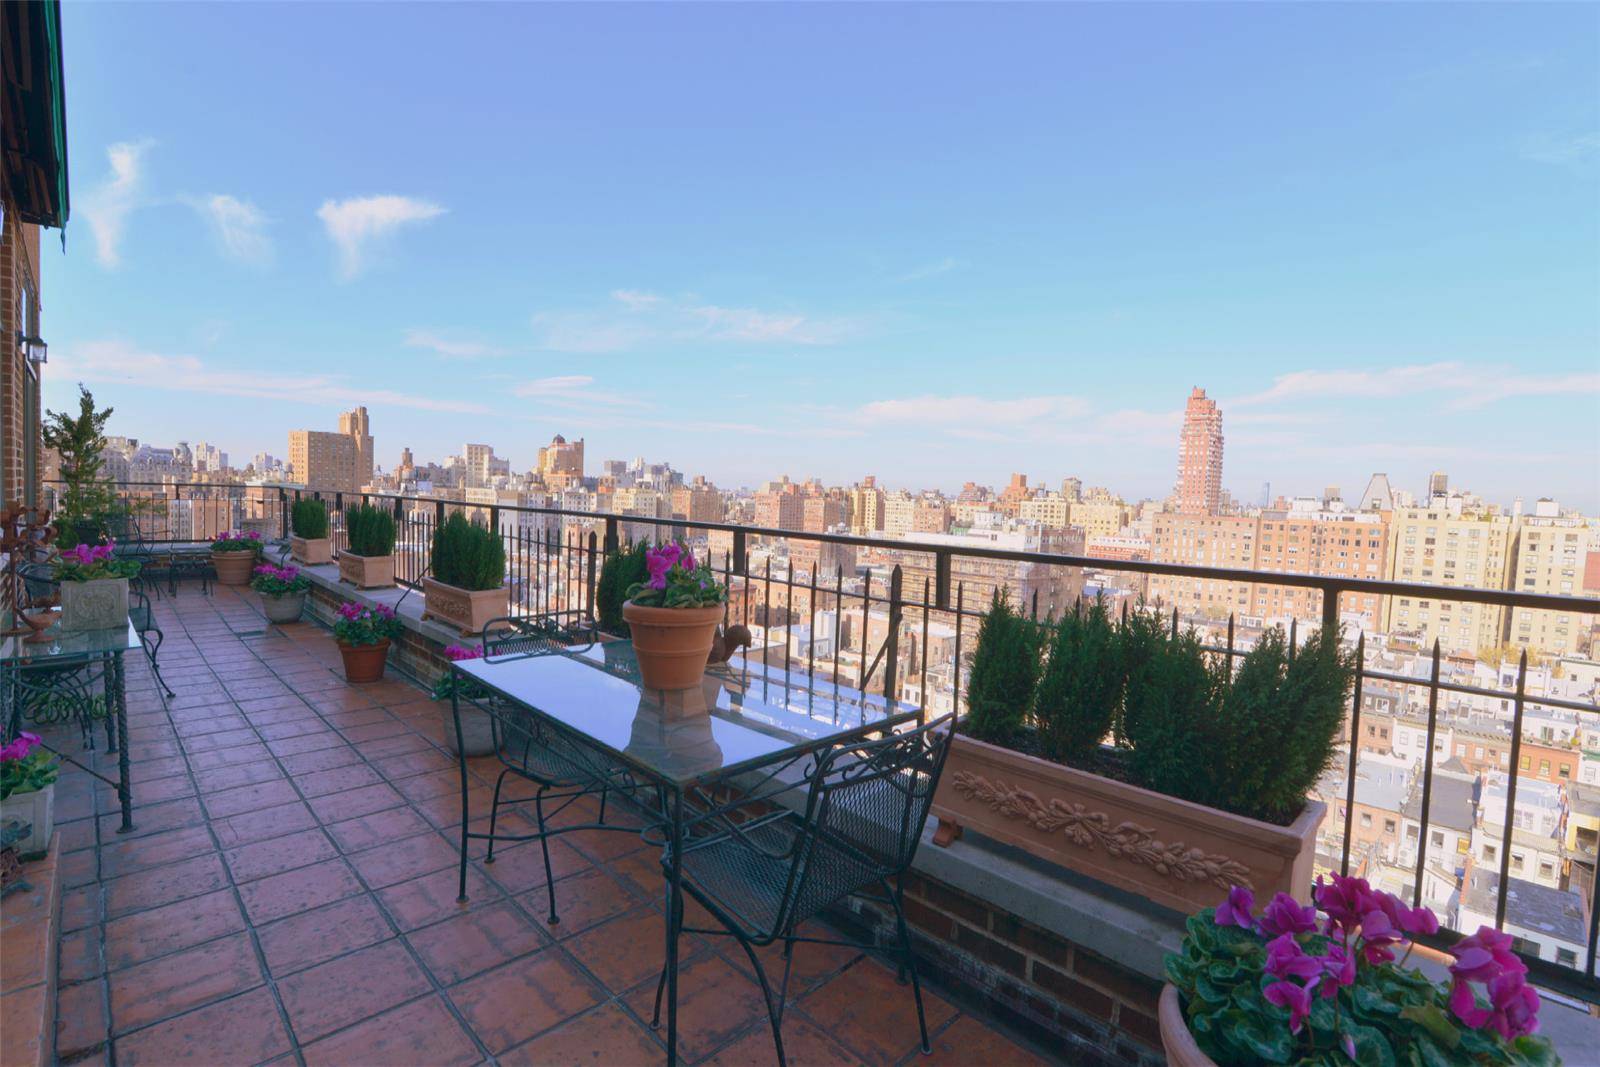 THE RESIDENCEThis magical masterpiece penthouse duplex is the trophy home you have been waiting for, just steps off Central Park !